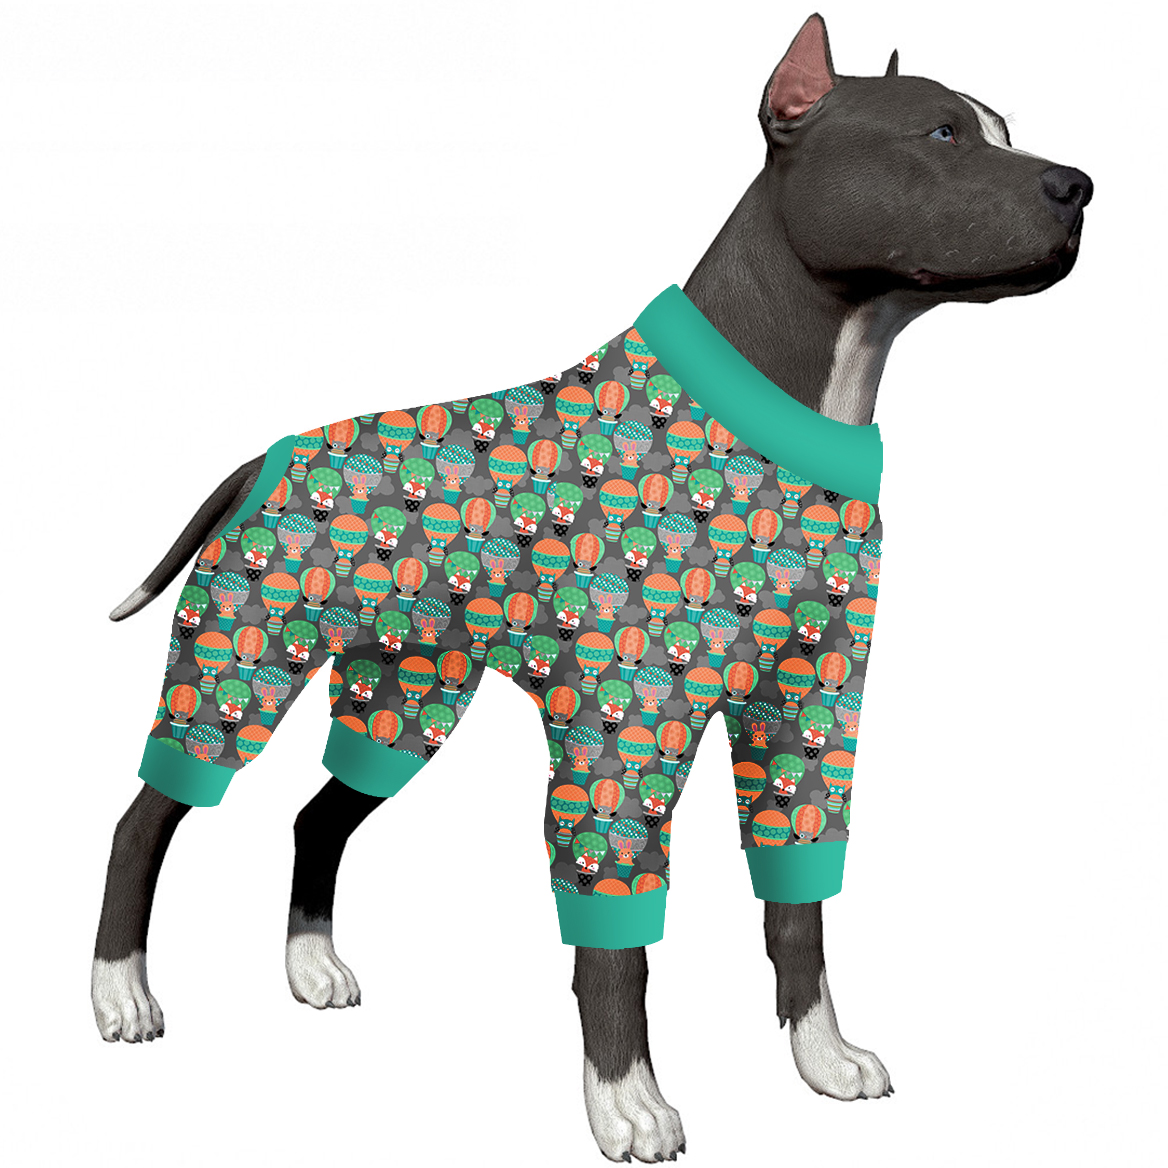 LovinPet Large Dog Onesie, Wound Care Cotton Dog Pajamas, Cozy Stretchy Fabric, Owls In Hot Air Balloons Dark Grey Prints Large Dog Pjs for Dogs Recovery Suit Party Pitbull Clothes